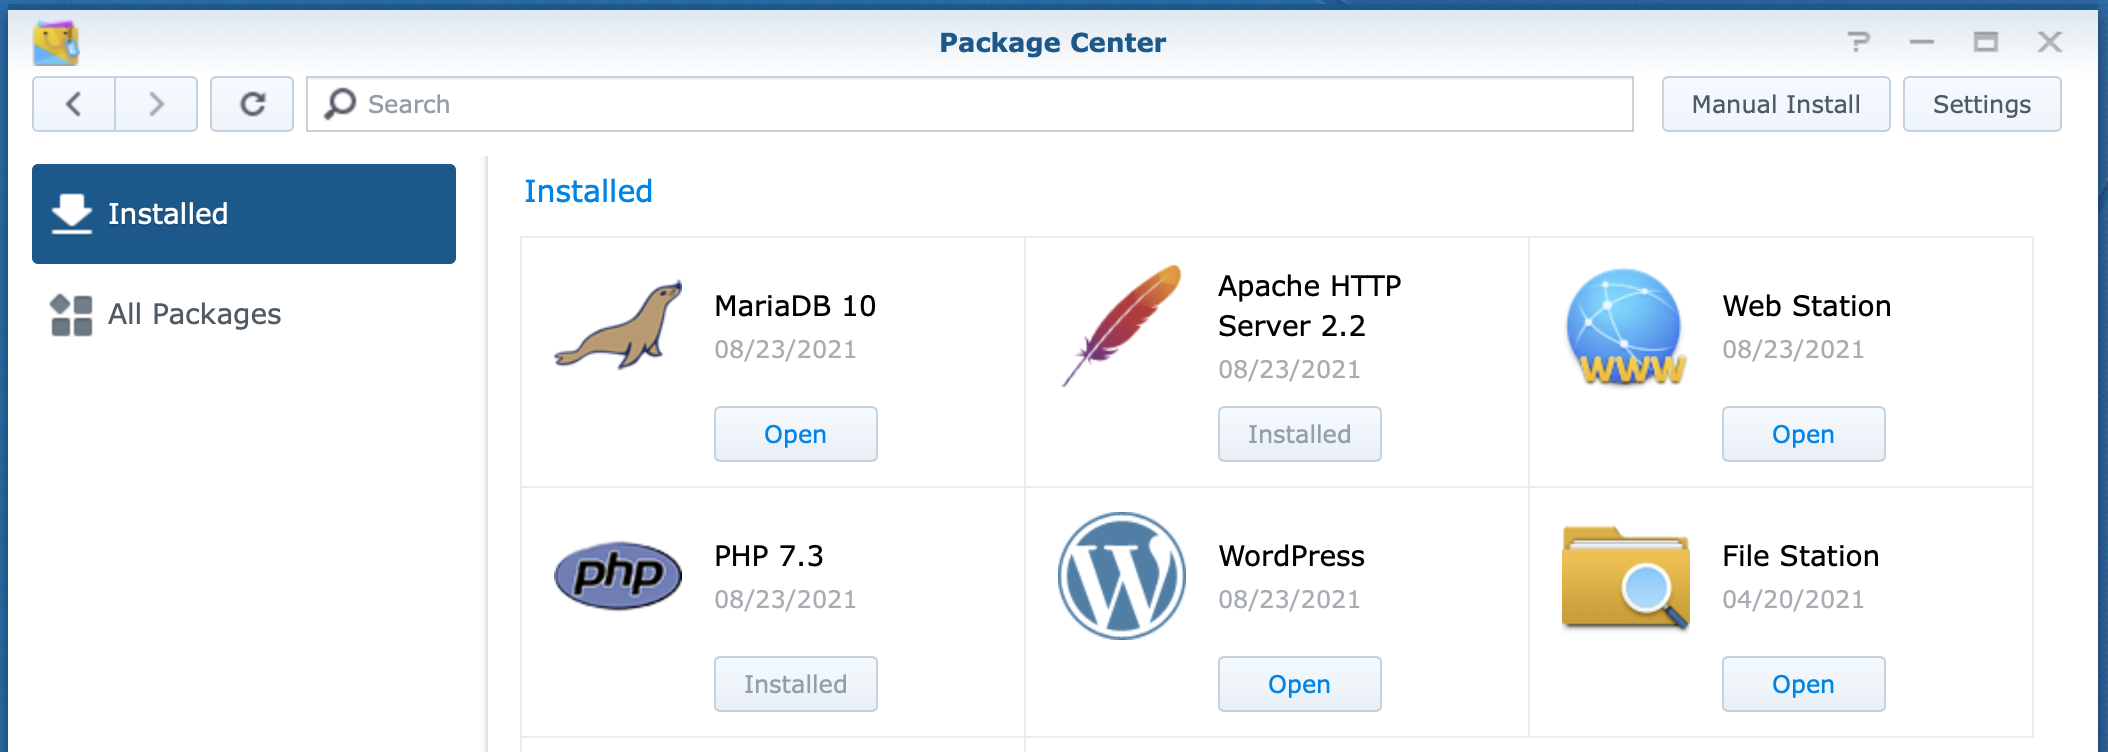 synology, package center, installed packages, dsm6, install wordpress on synology